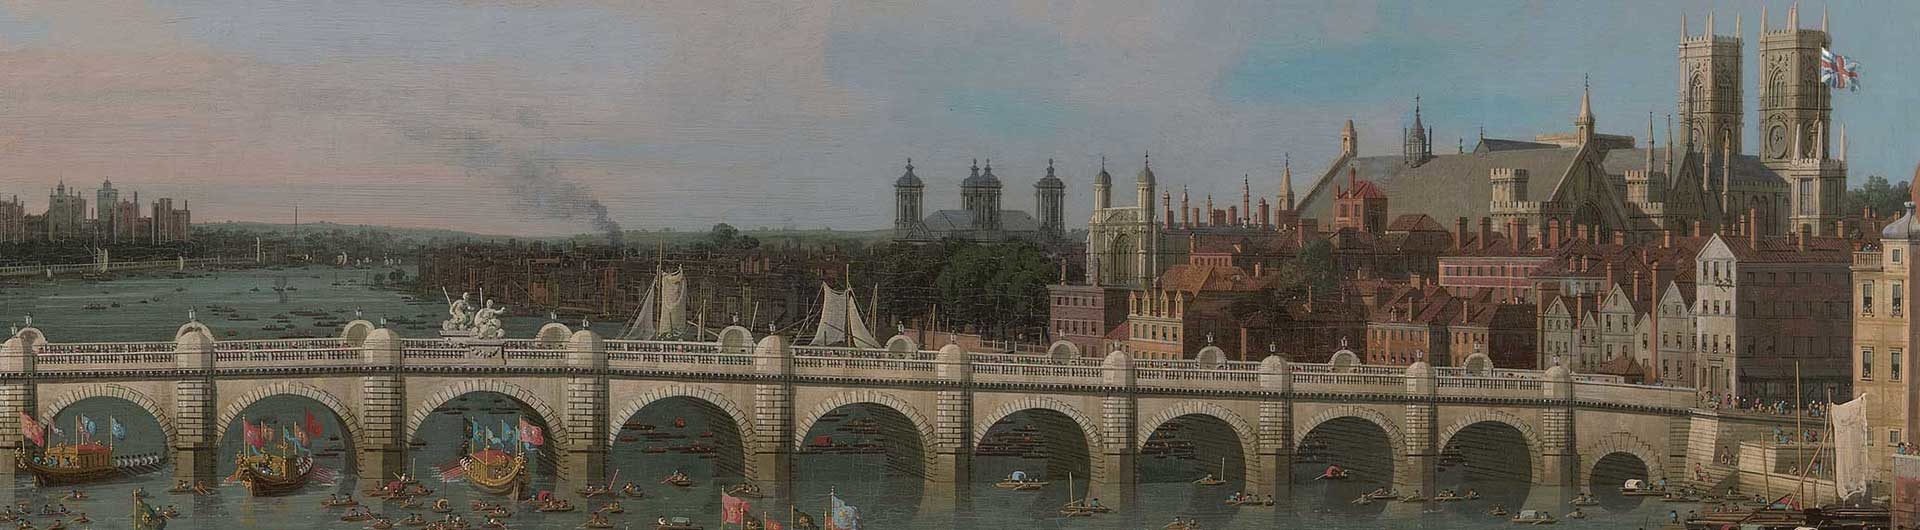 Giovanni Antonio Canal (‘Canaletto’), Westminster Bridge, with the Lord Mayor's Procession on the Thames, 1747, Yale Center for British Art, Paul Mellon Collection, B1976.7.94